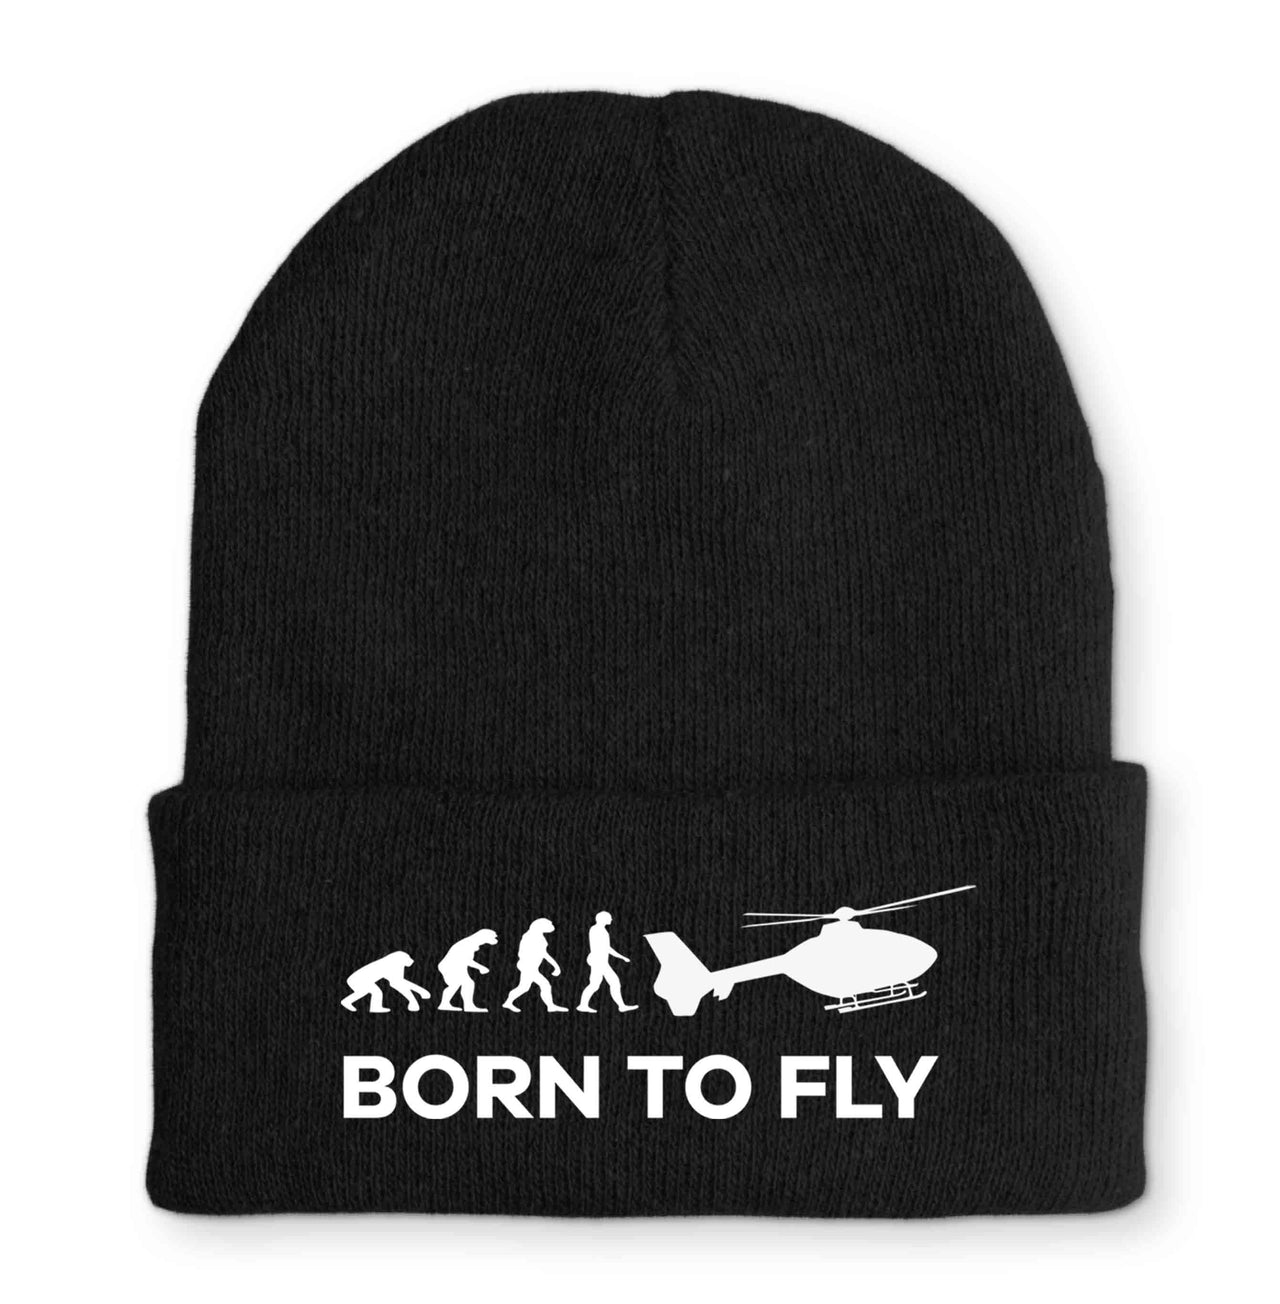 Born To Fly Helicopter Embroidered Beanies